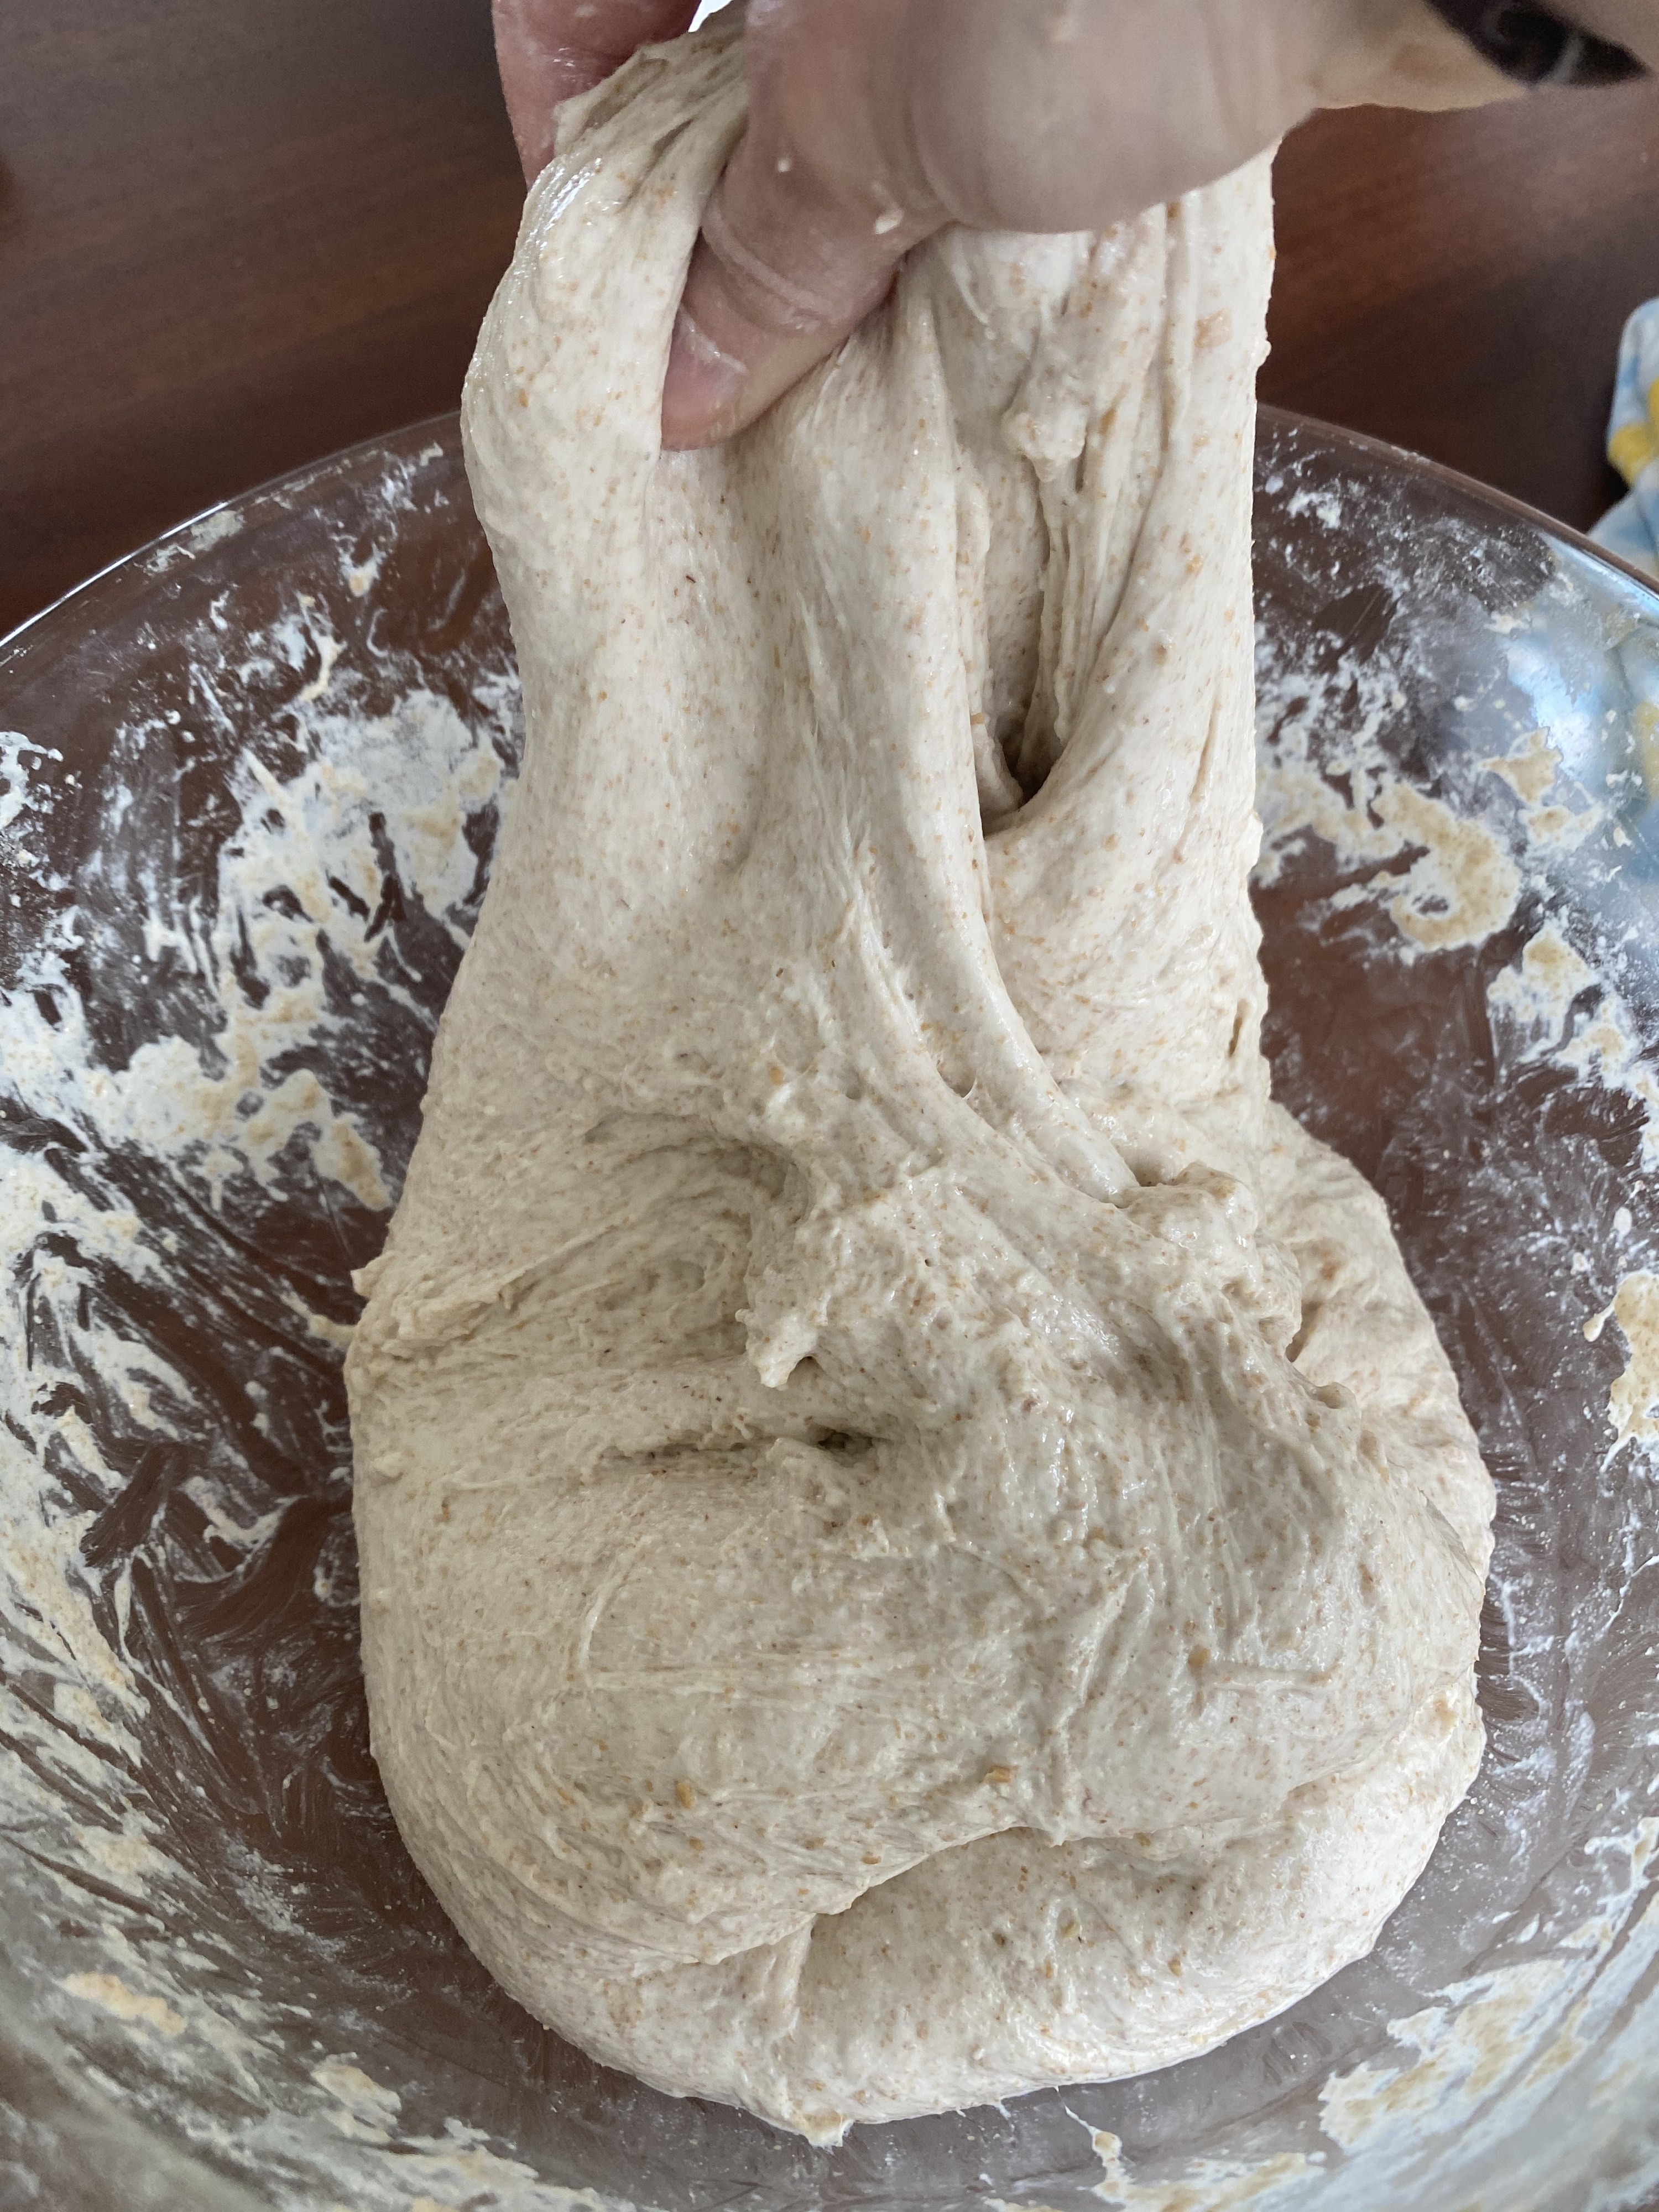 Hands stretching the dough upward while performing stretch and folds.